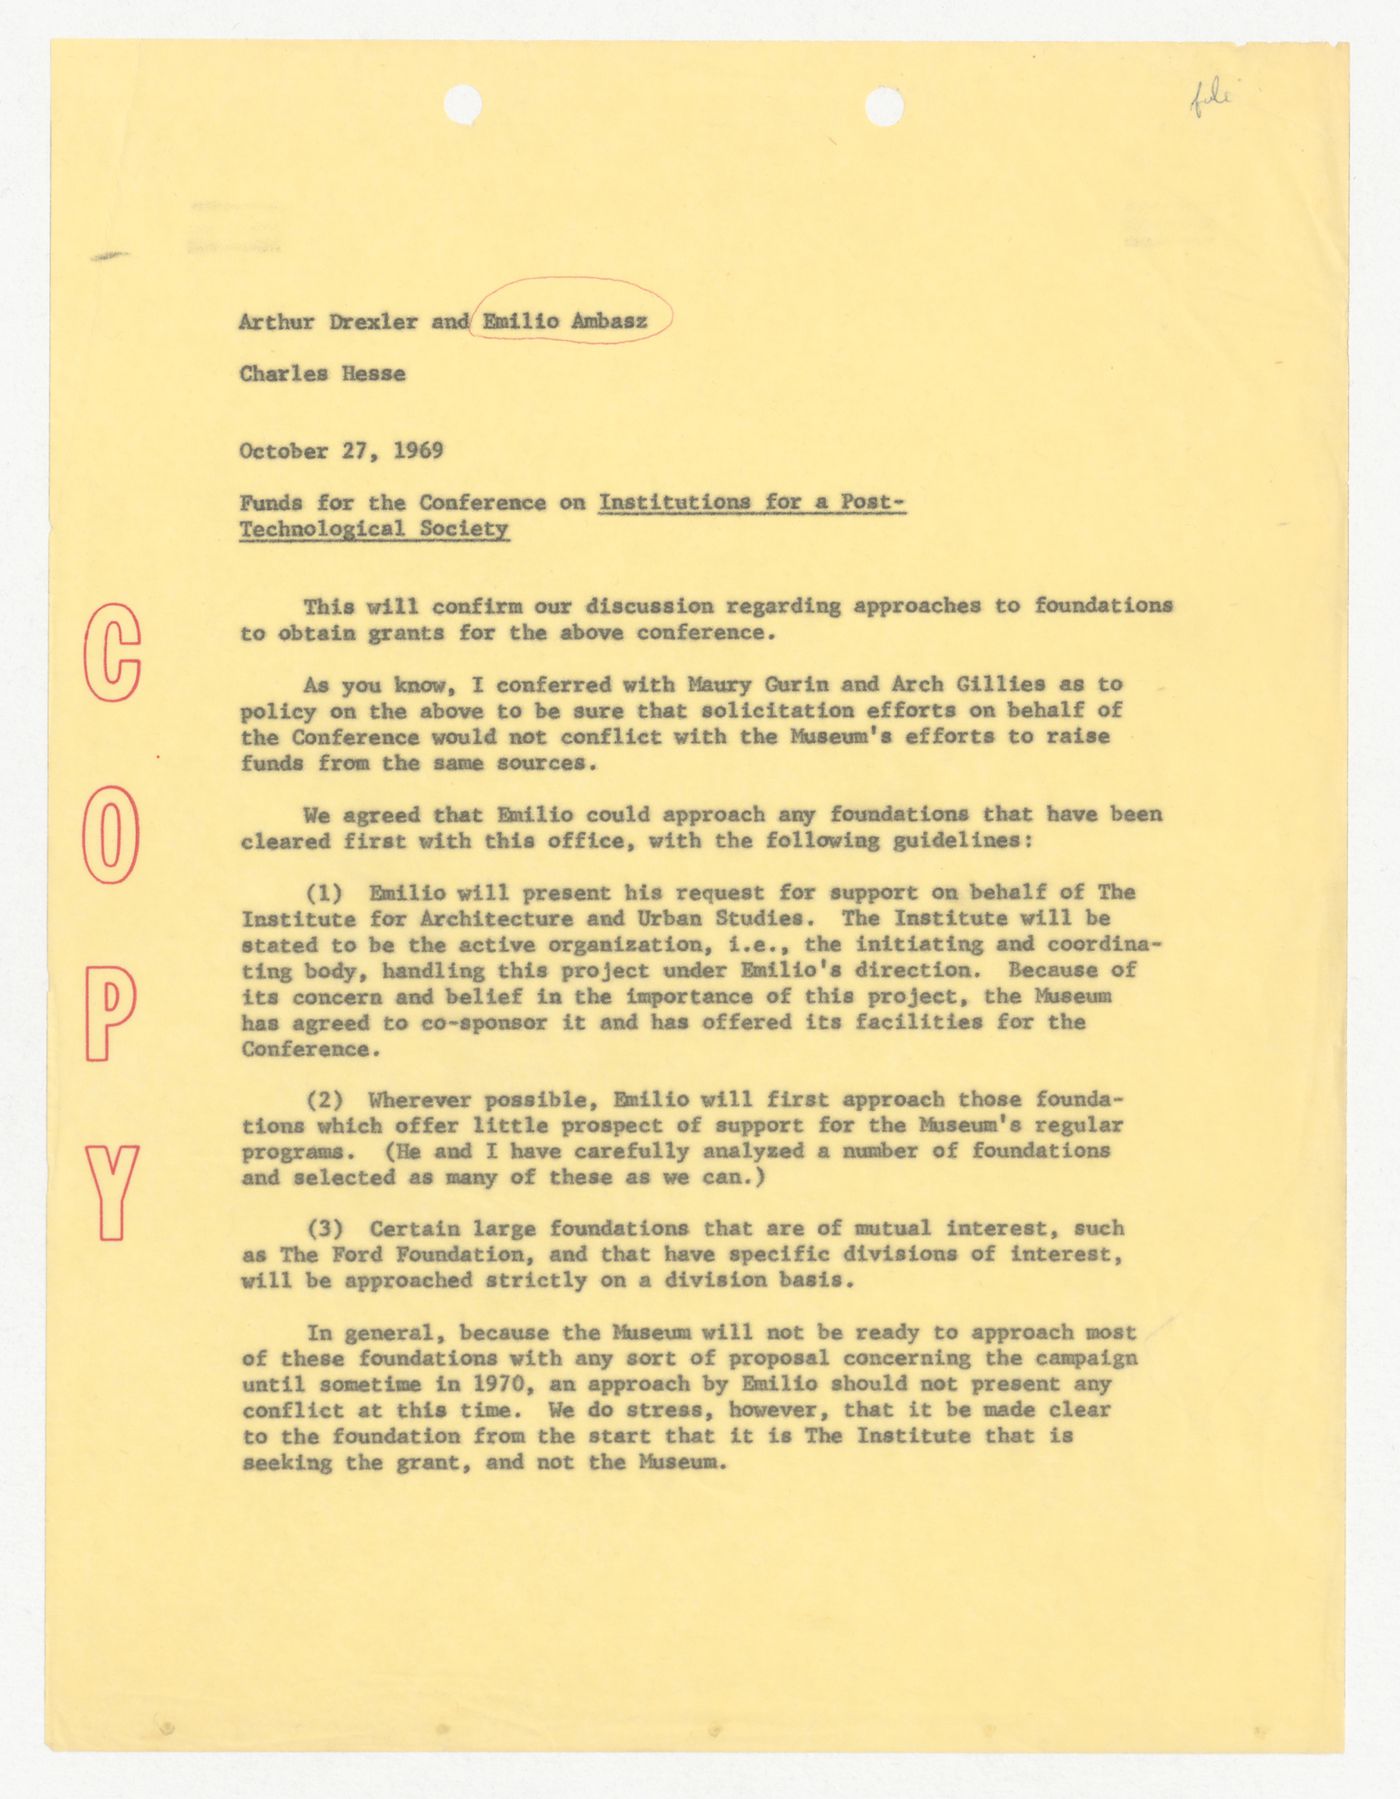 Copy of a letter from Charles Hesse to Emilio Ambasz and Arthur Drexler about fundraising strategy for Institutions for a Post-Technological Society conference